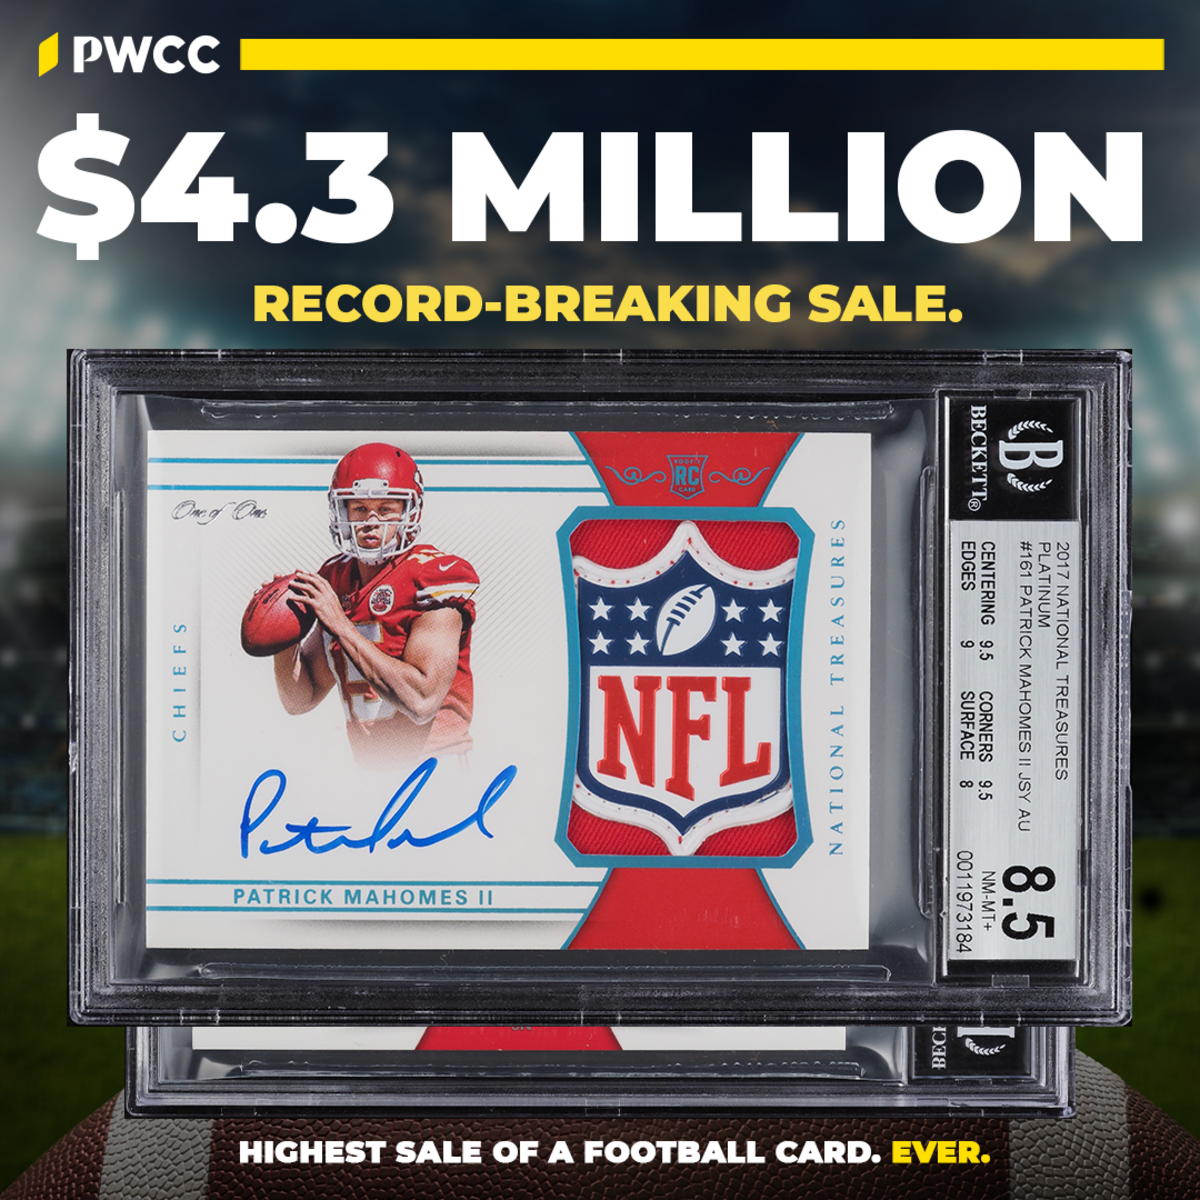 Patrick Mahomes Rookie Card Sells For $4.3 Mil, Most Expensive Football  Card Ever!